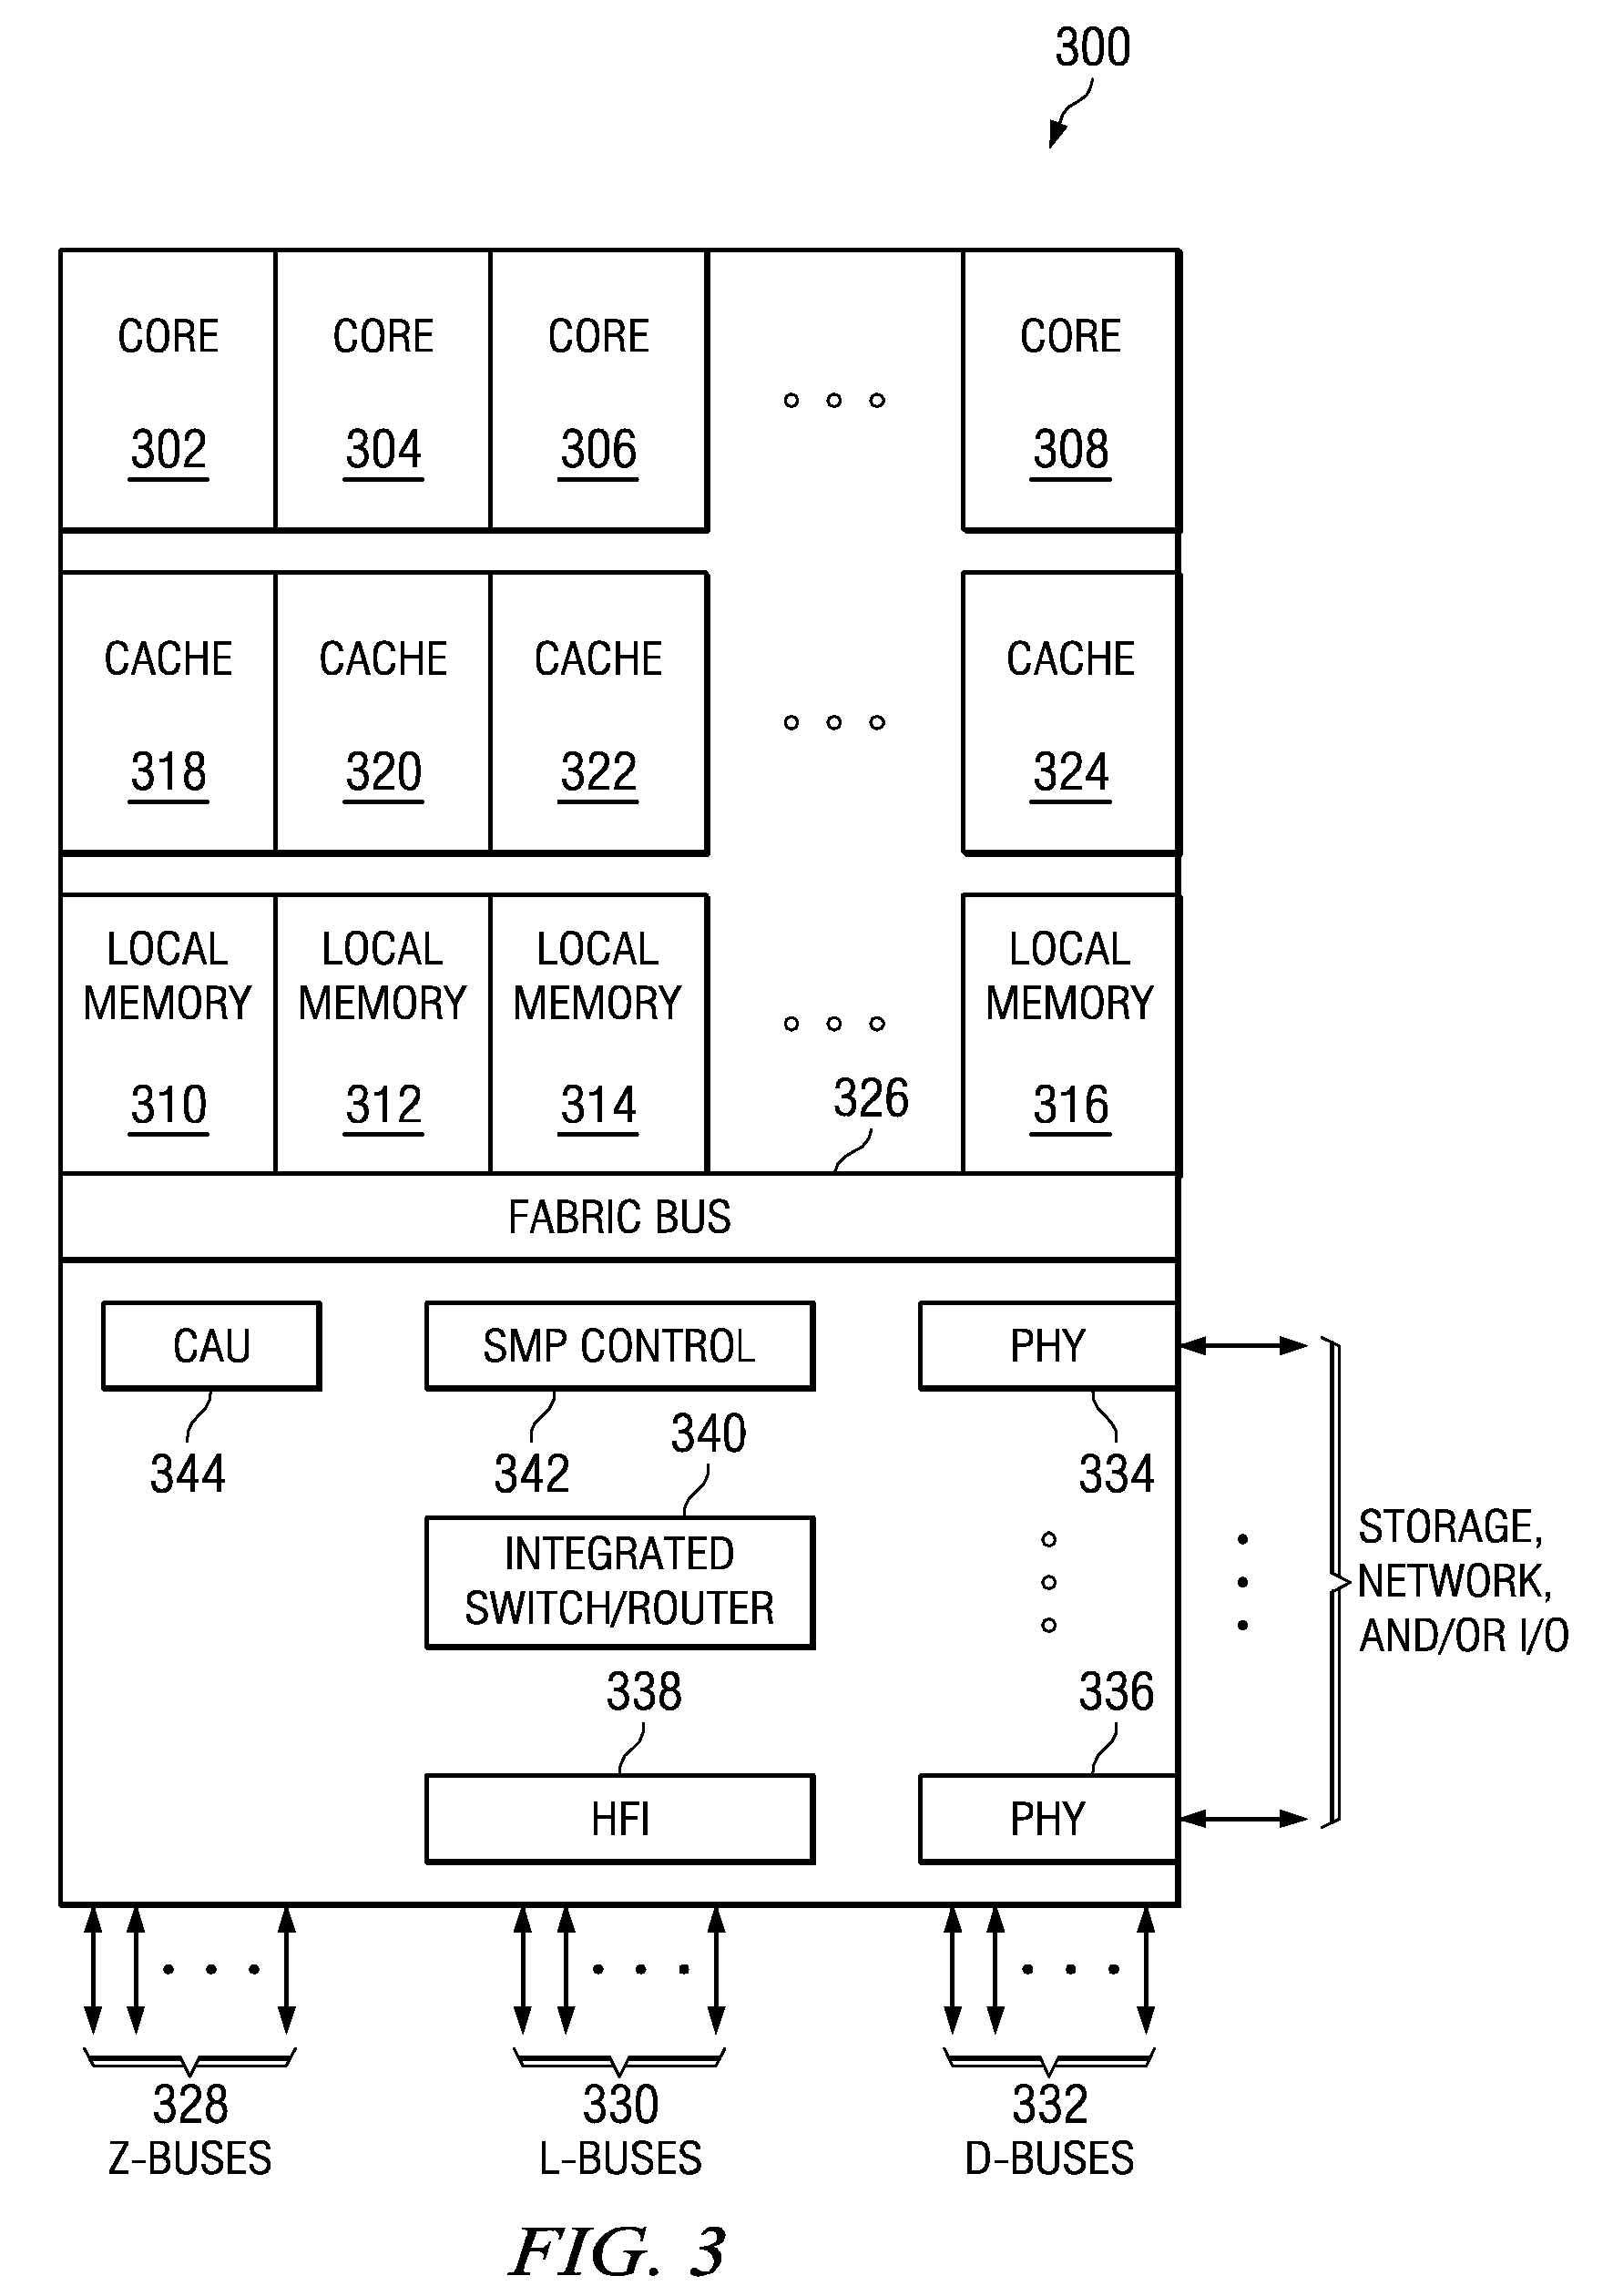 System and Method for Providing Full Hardware Support of Collective Operations in a Multi-Tiered Full-Graph Interconnect Architecture